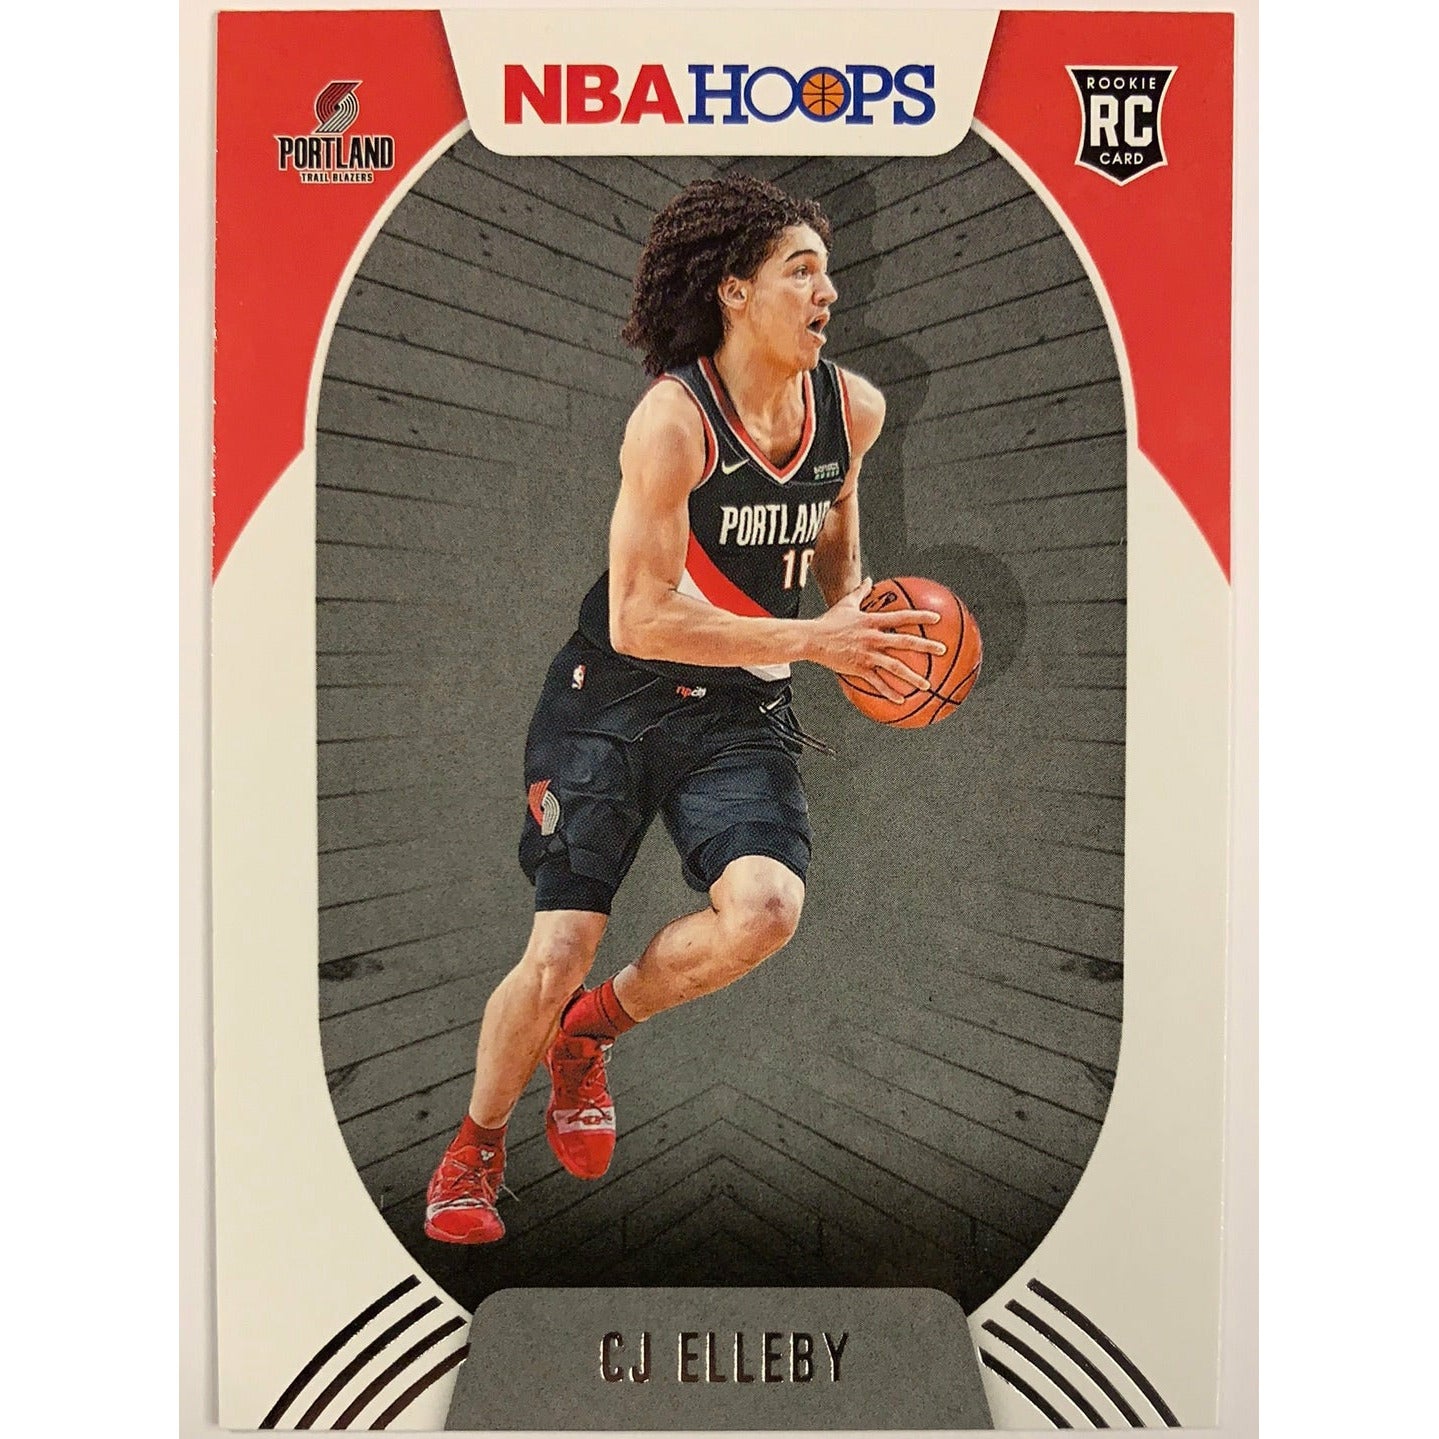  2020-21 Hoops CJ Elleby RC  Local Legends Cards & Collectibles